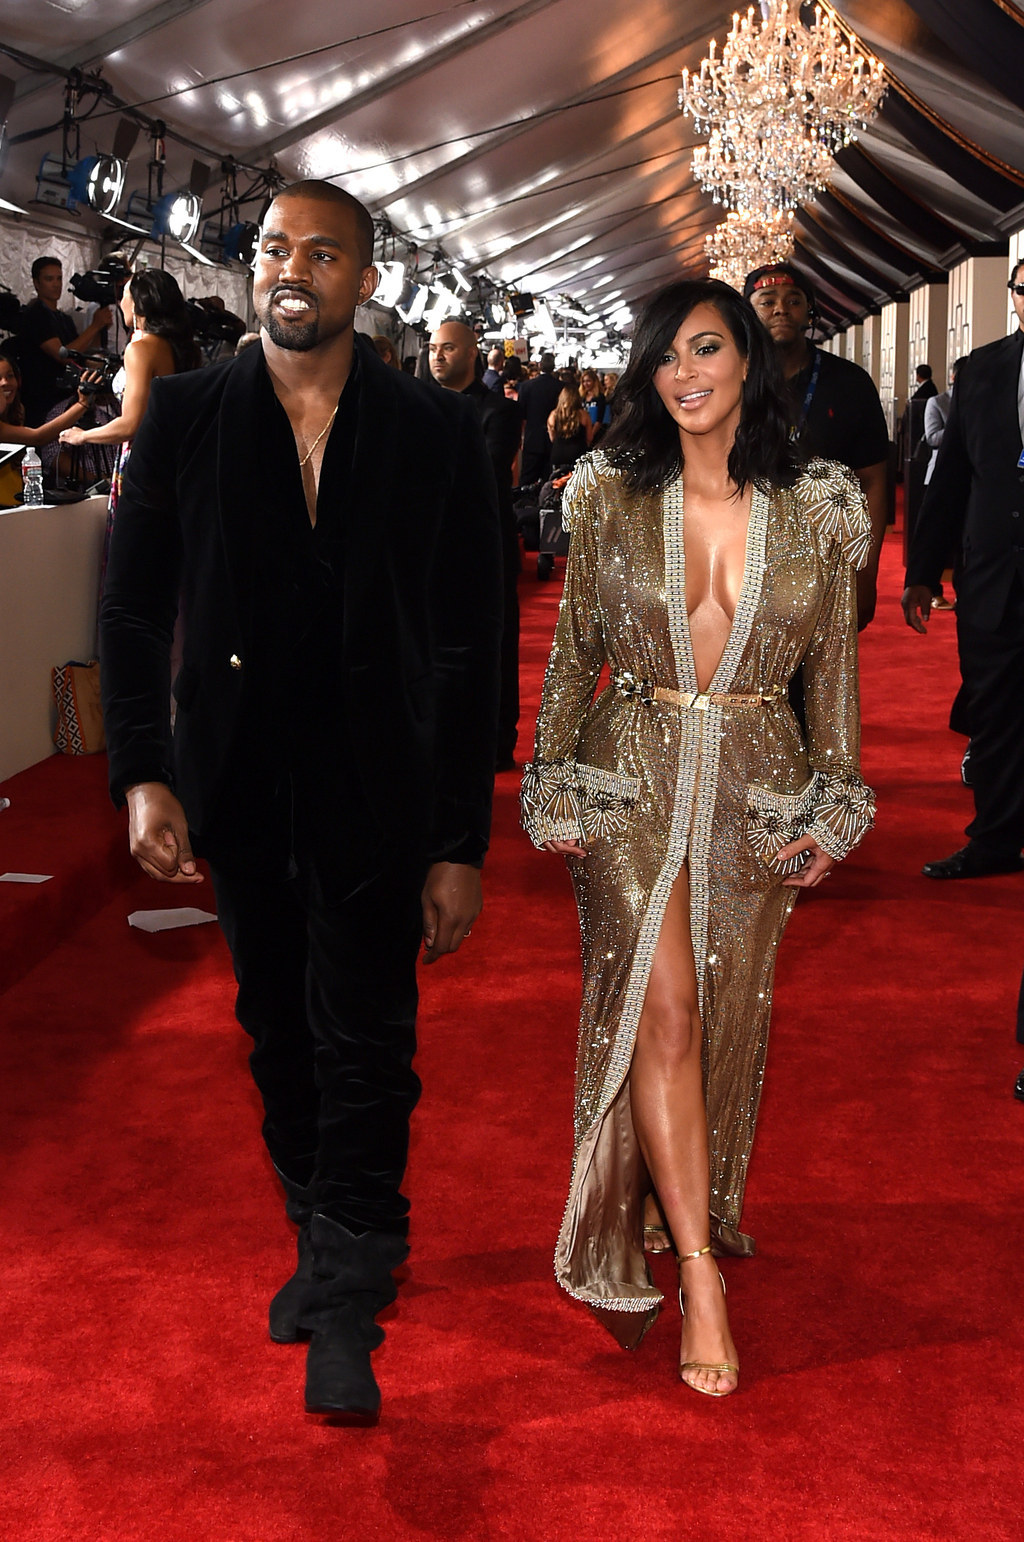 Kimye Couldn't Keep Their Hands Off Each Other At The Grammy Awards